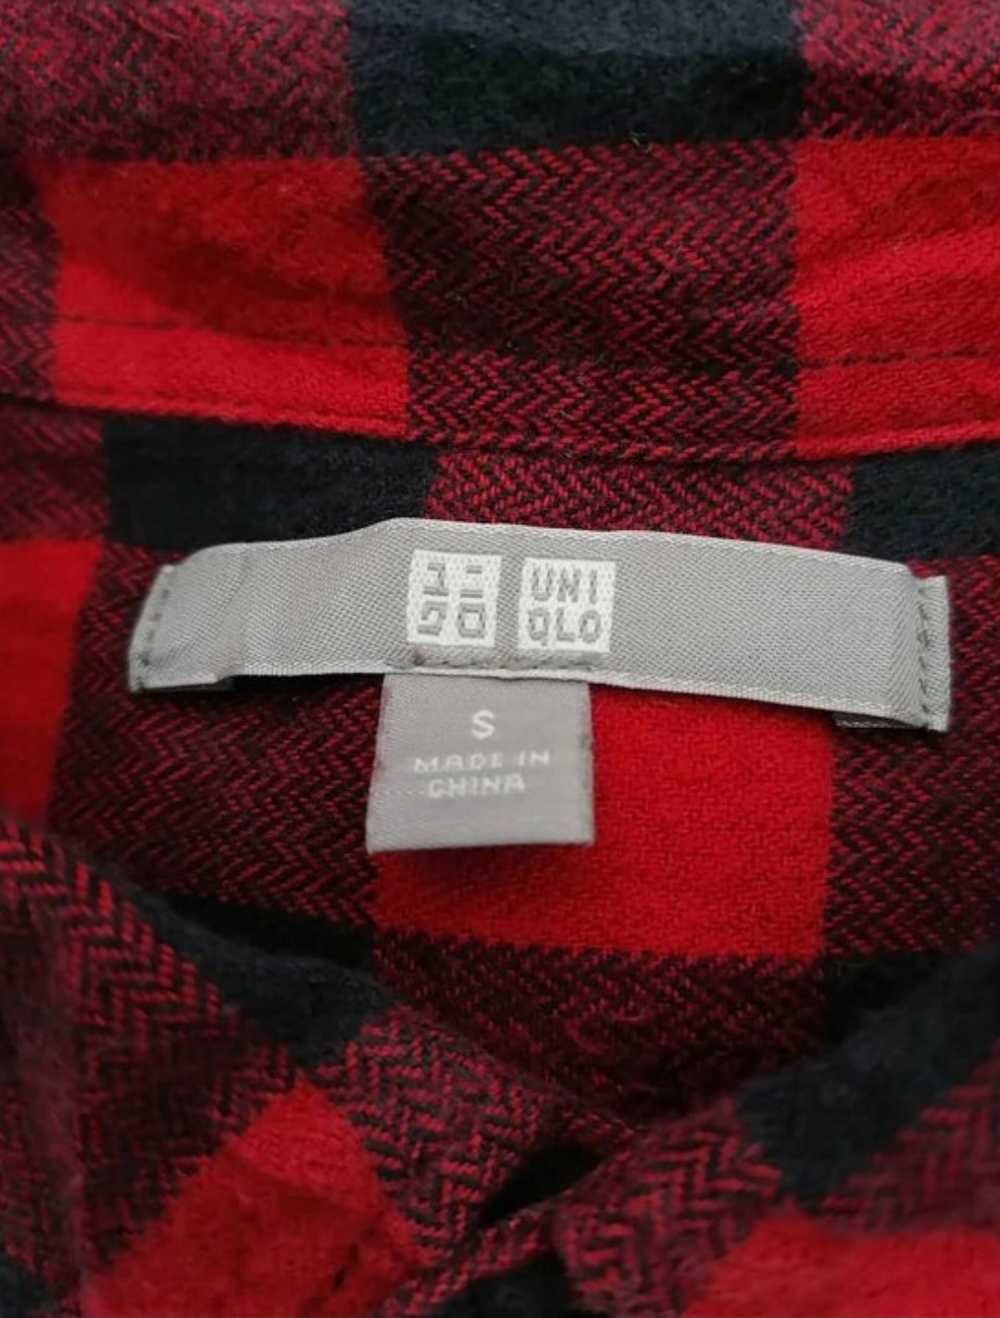 Uniqlo Flannel Longsleeve Buttons Shirt - image 4